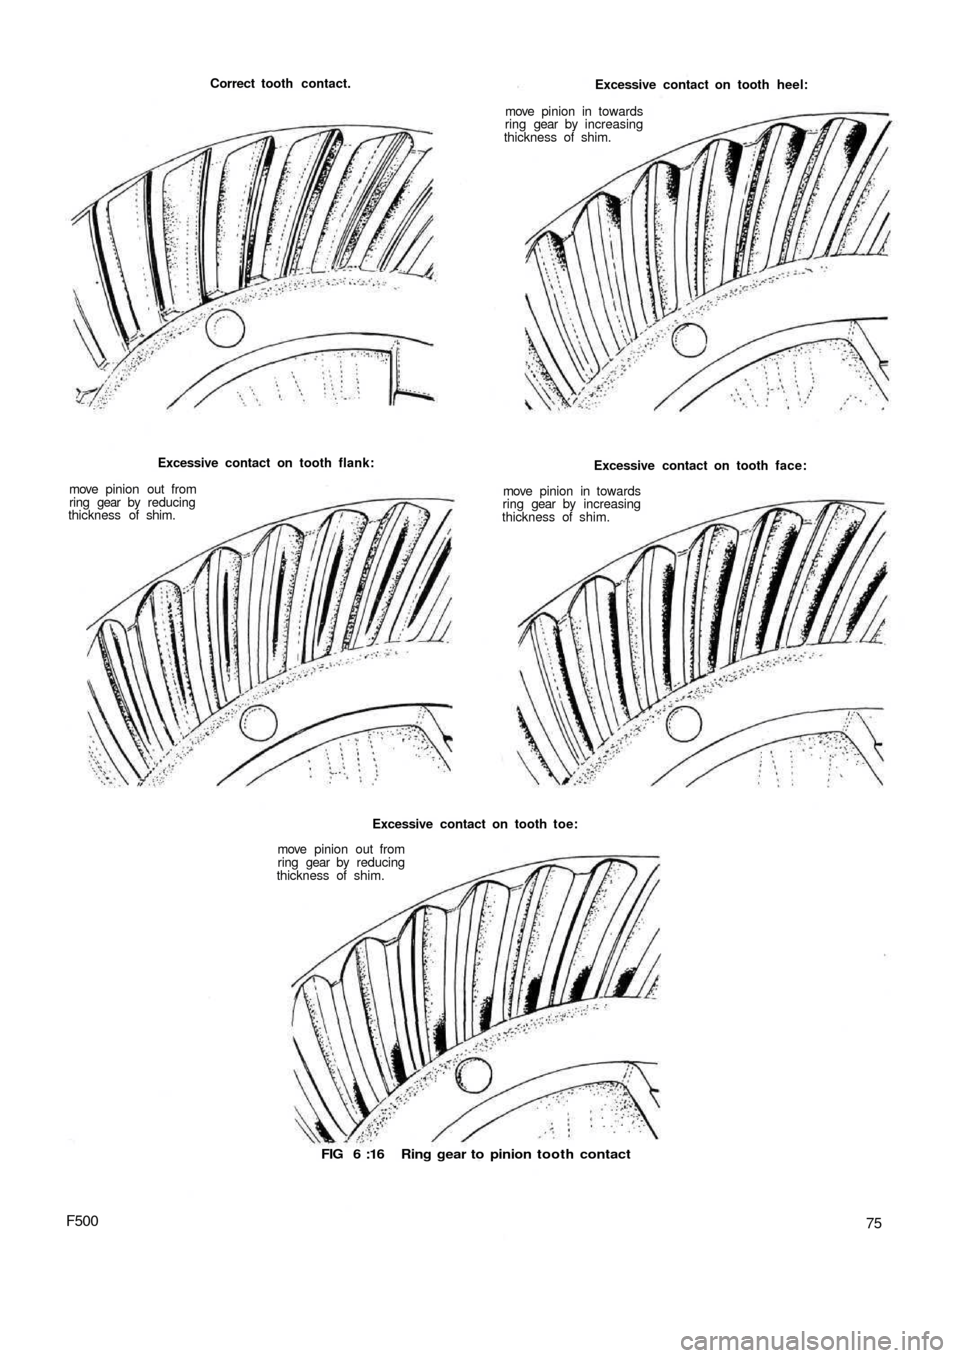 FIAT 500 1964 1.G Repair Manual Correct tooth contact.
Excessive contact on tooth flank:
move  pinion out from
ring gear  by  reducing
thickness of shim.
Excessive contact on tooth toe:
move  pinion out from
ring gear by reducing
th